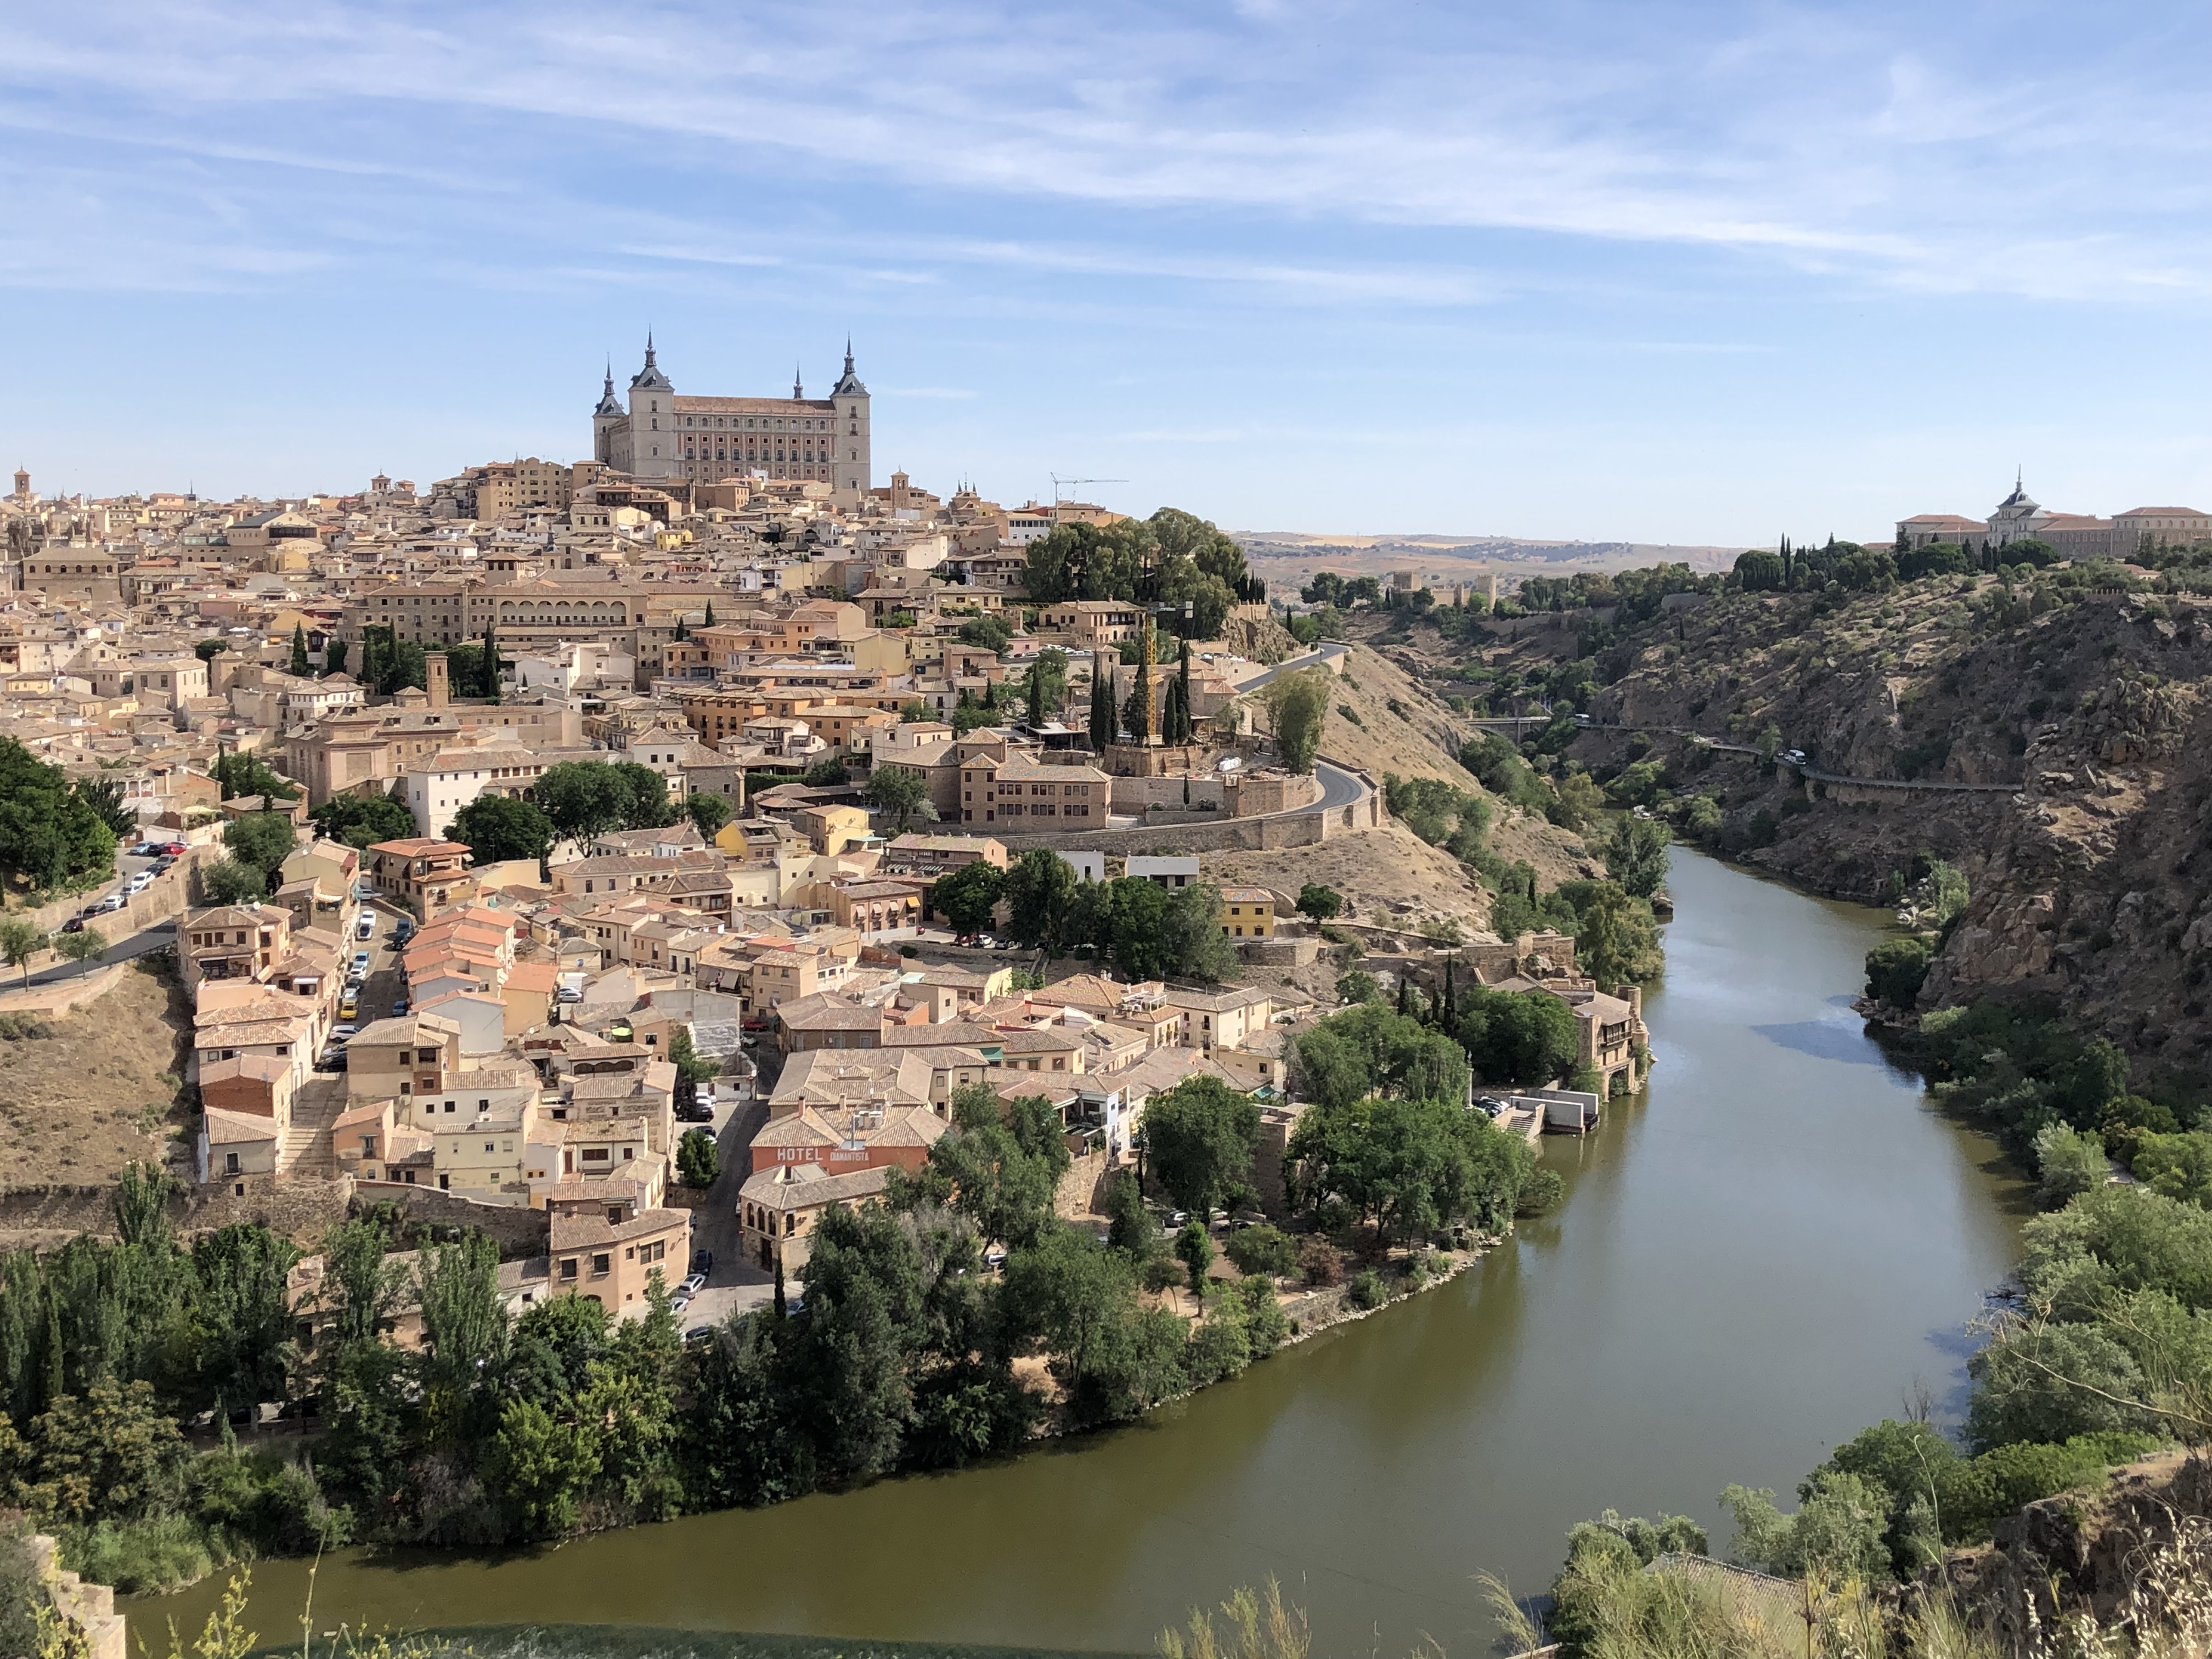 A river running along side the city of Toledo